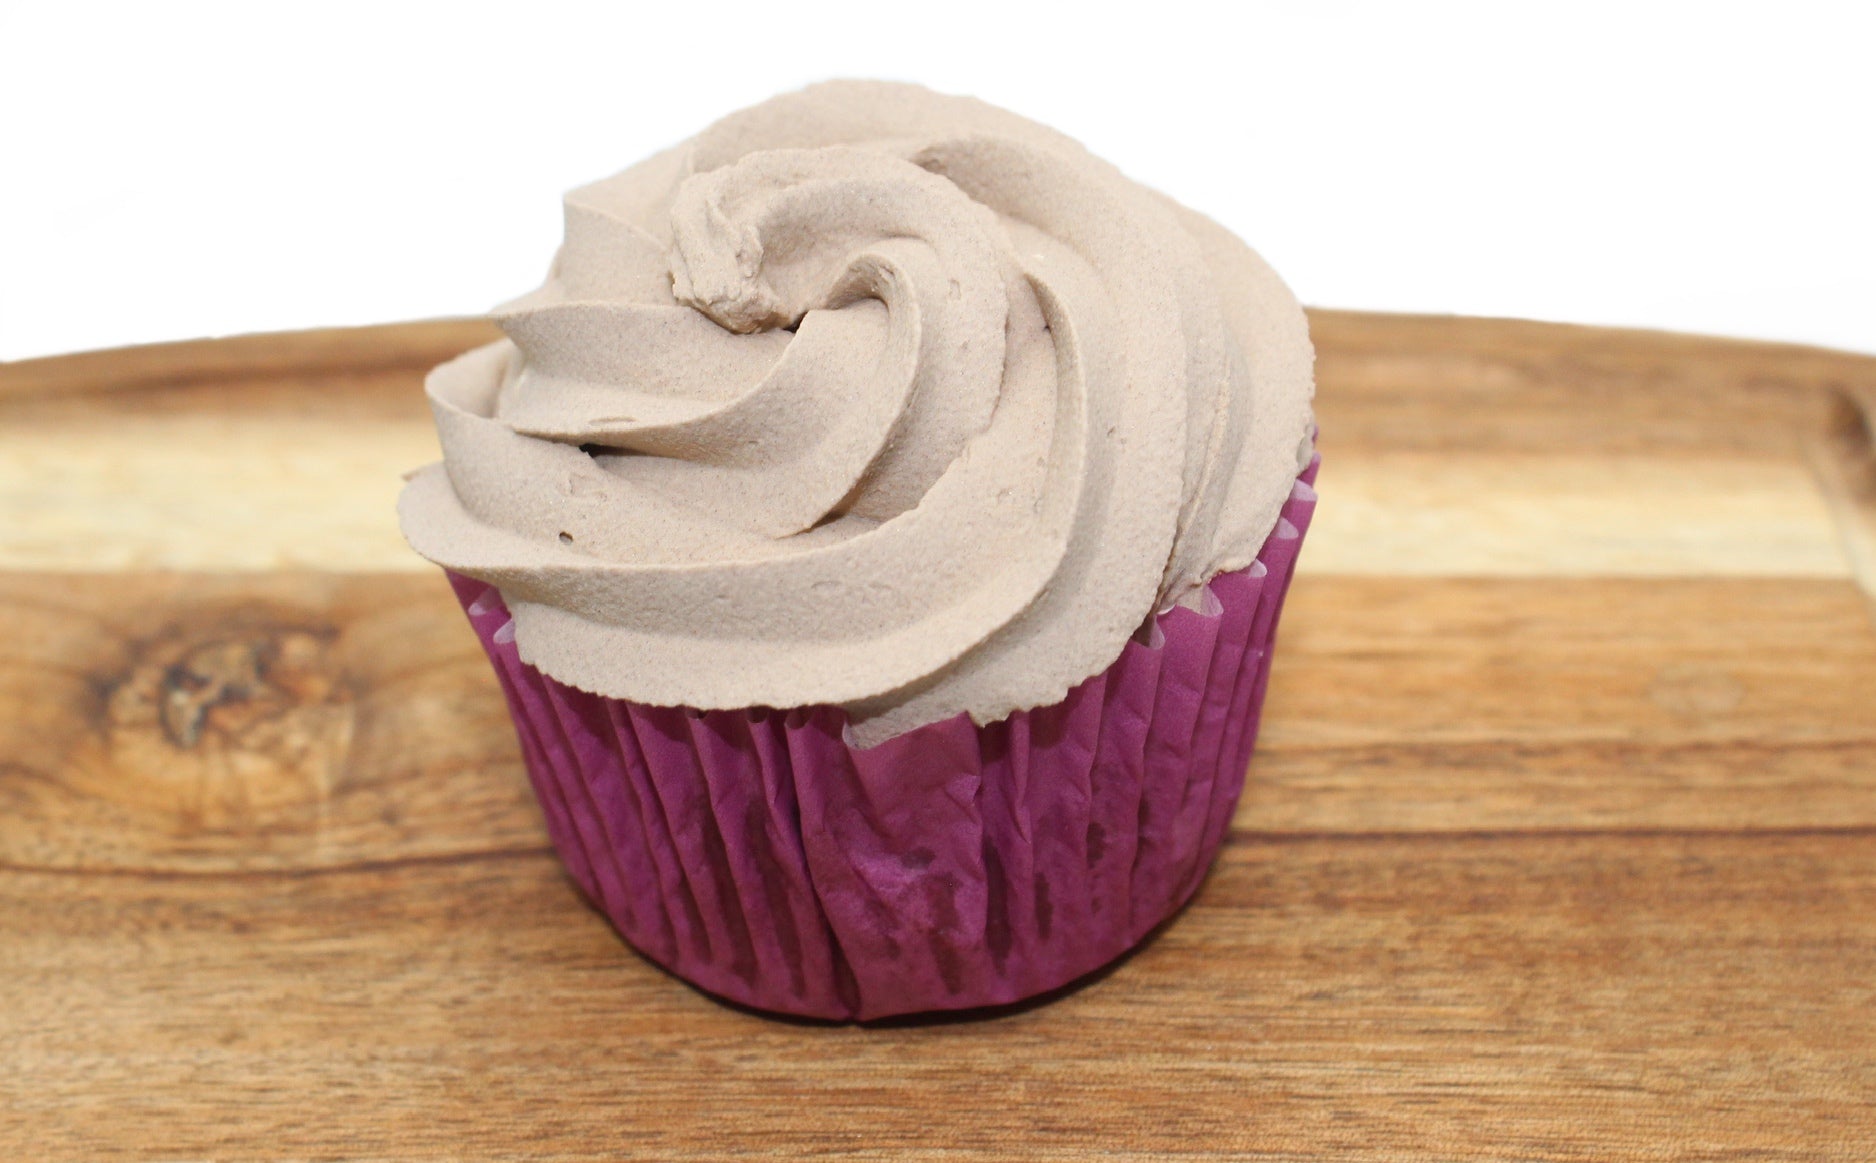 A cupcake wrapped in a purple paper liner with brown, carob frosting. The cupcake is displayed on a wood cutting board.